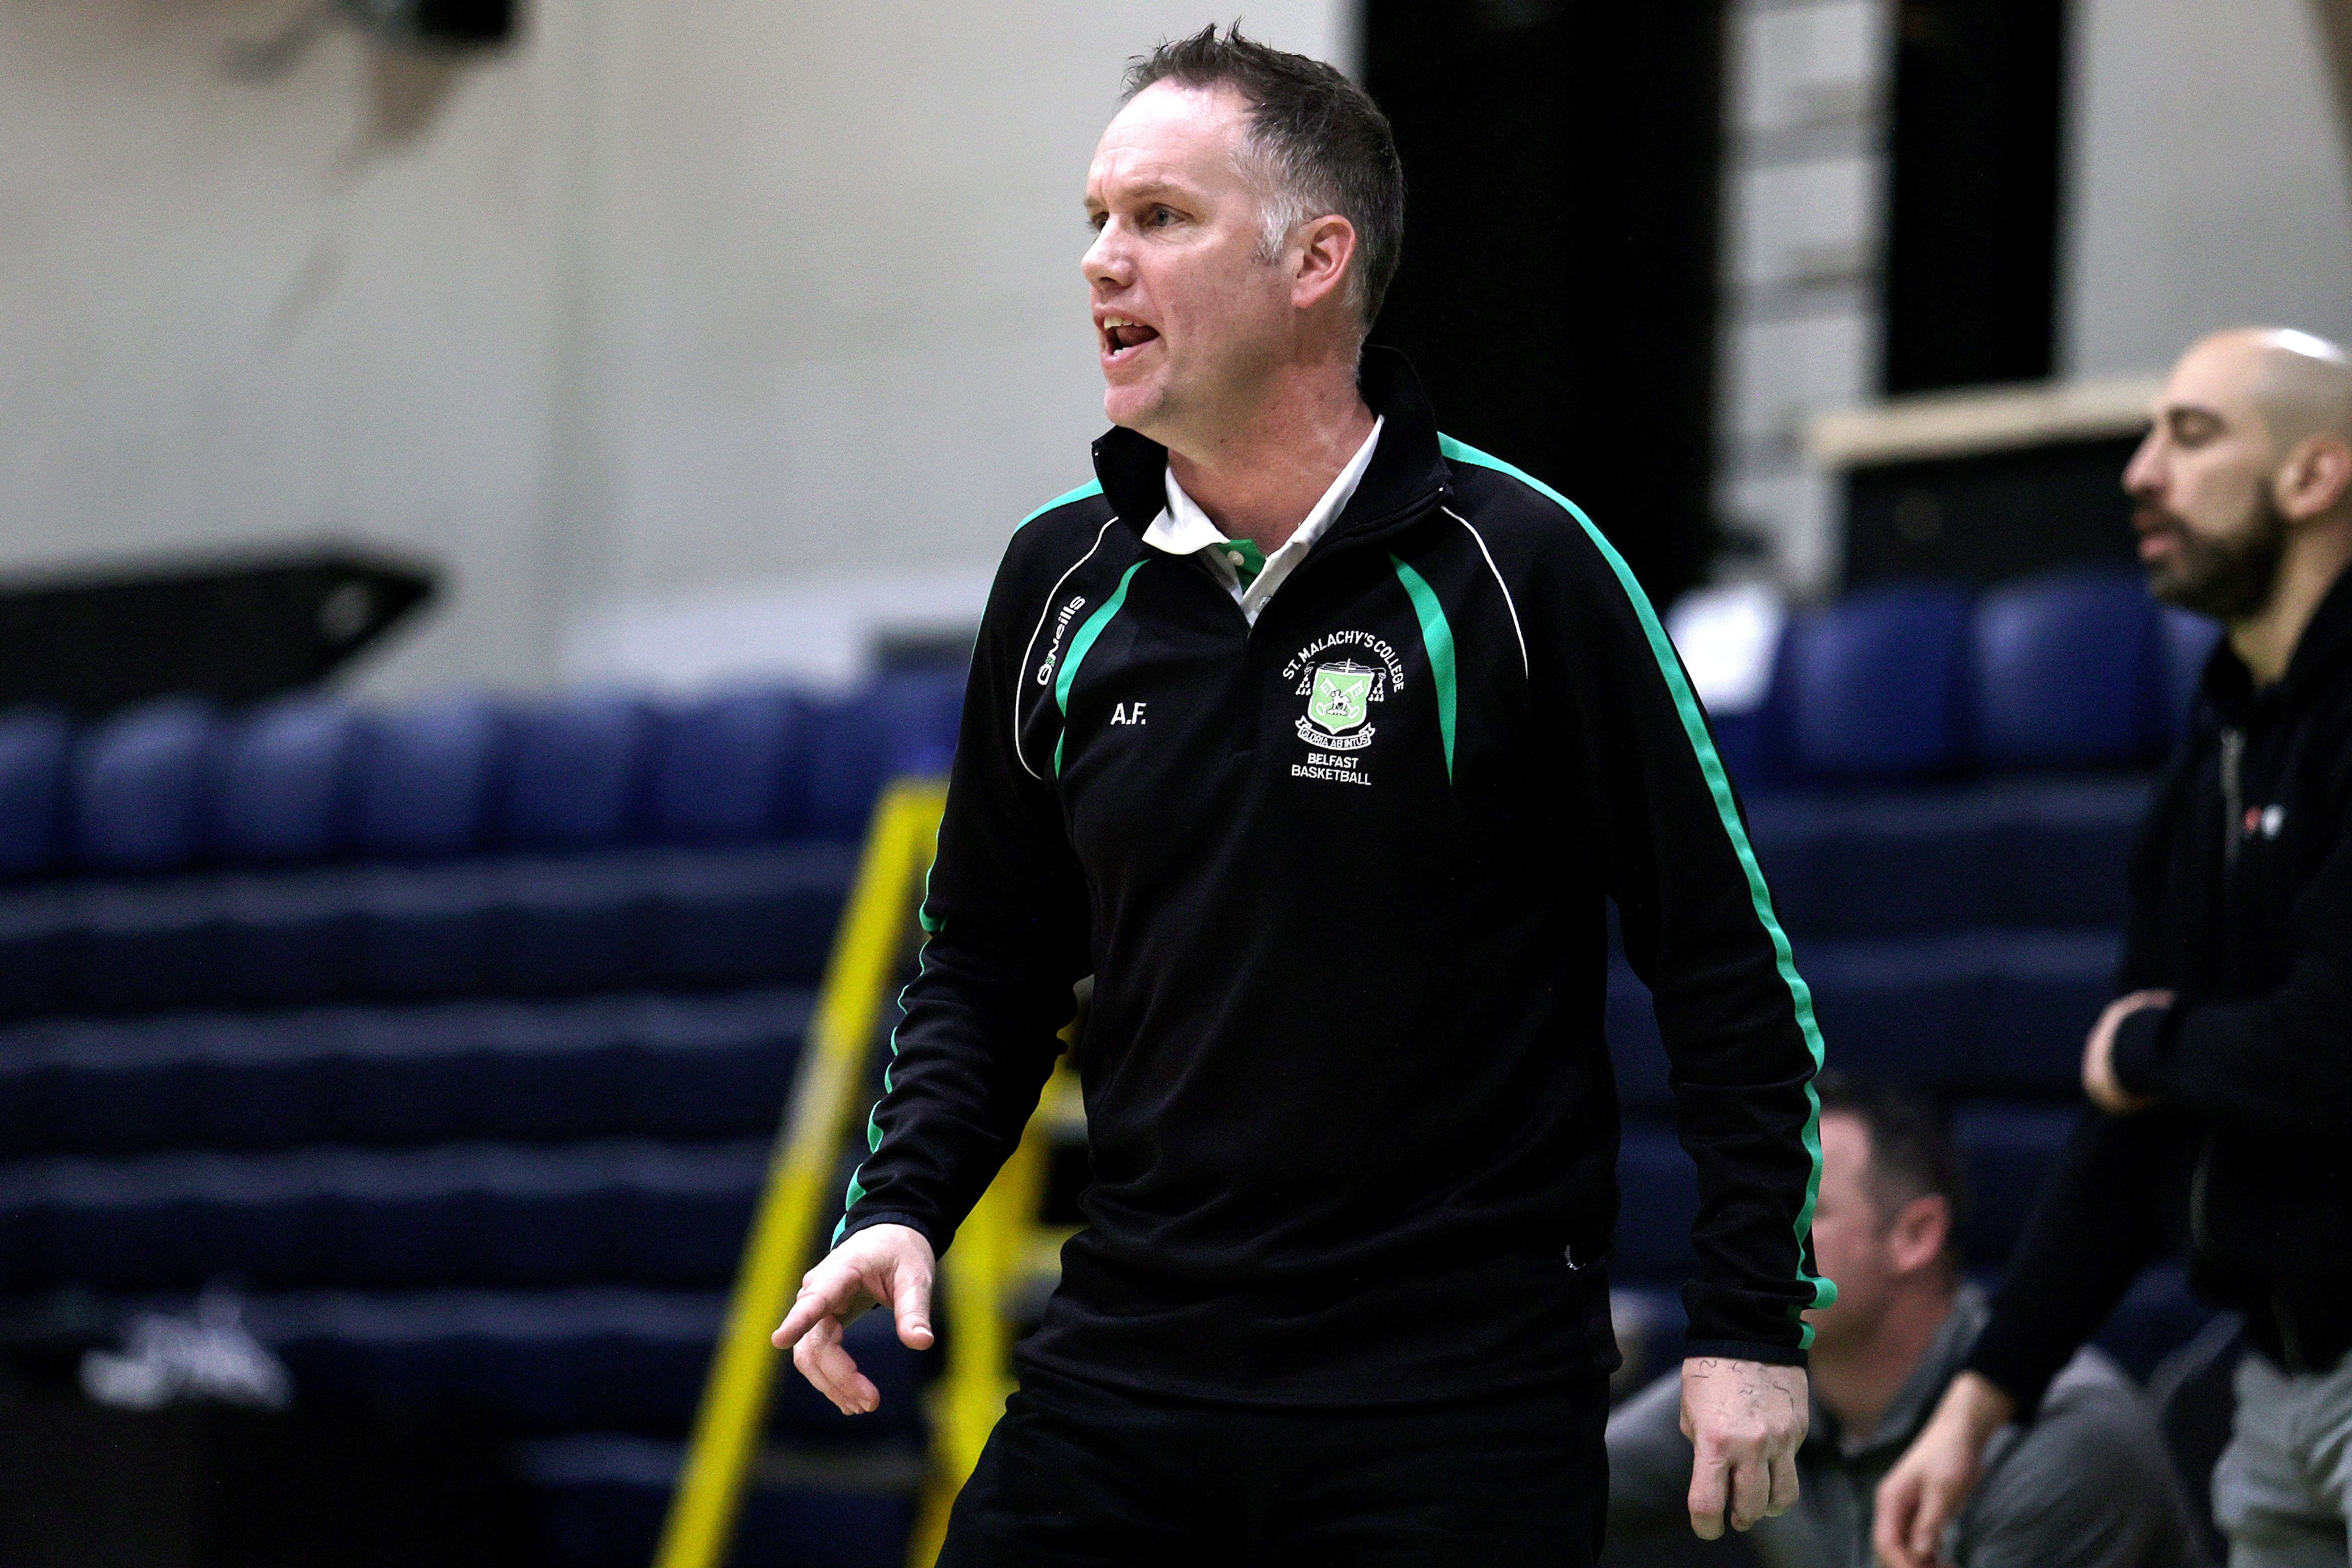 Belfast Star coach Adrian Fulton refused to blame refereeing calls for his side\'s overtime loss on Saturday that saw their season come to an end